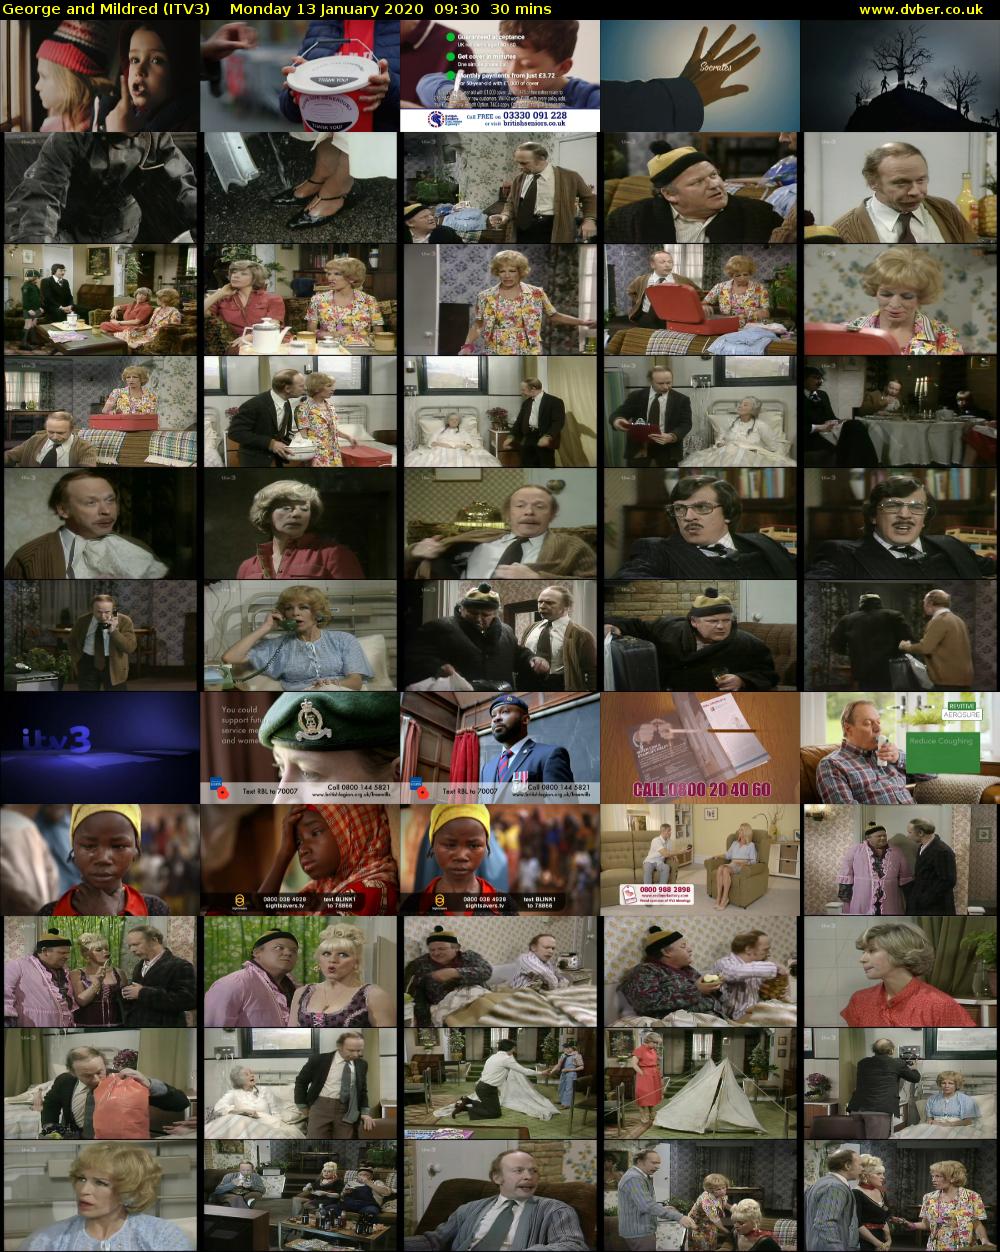 George and Mildred (ITV3) Monday 13 January 2020 09:30 - 10:00